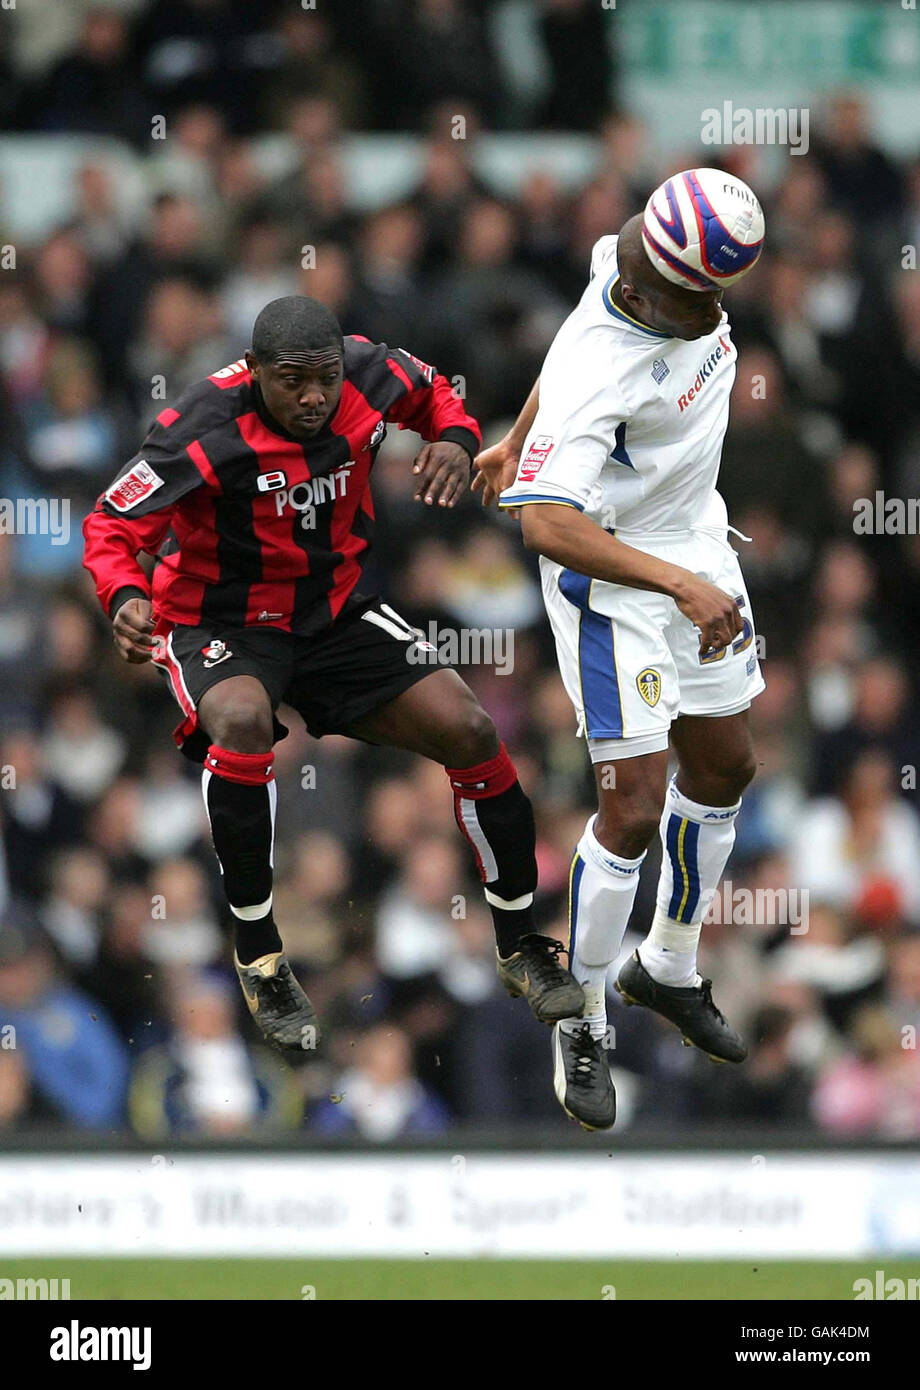 Leeds United's David Lucas and Bournemouth's Jo Kuffour battle for the ball during the Coca-Cola League One match at Elland Road, Leeds. Stock Photo